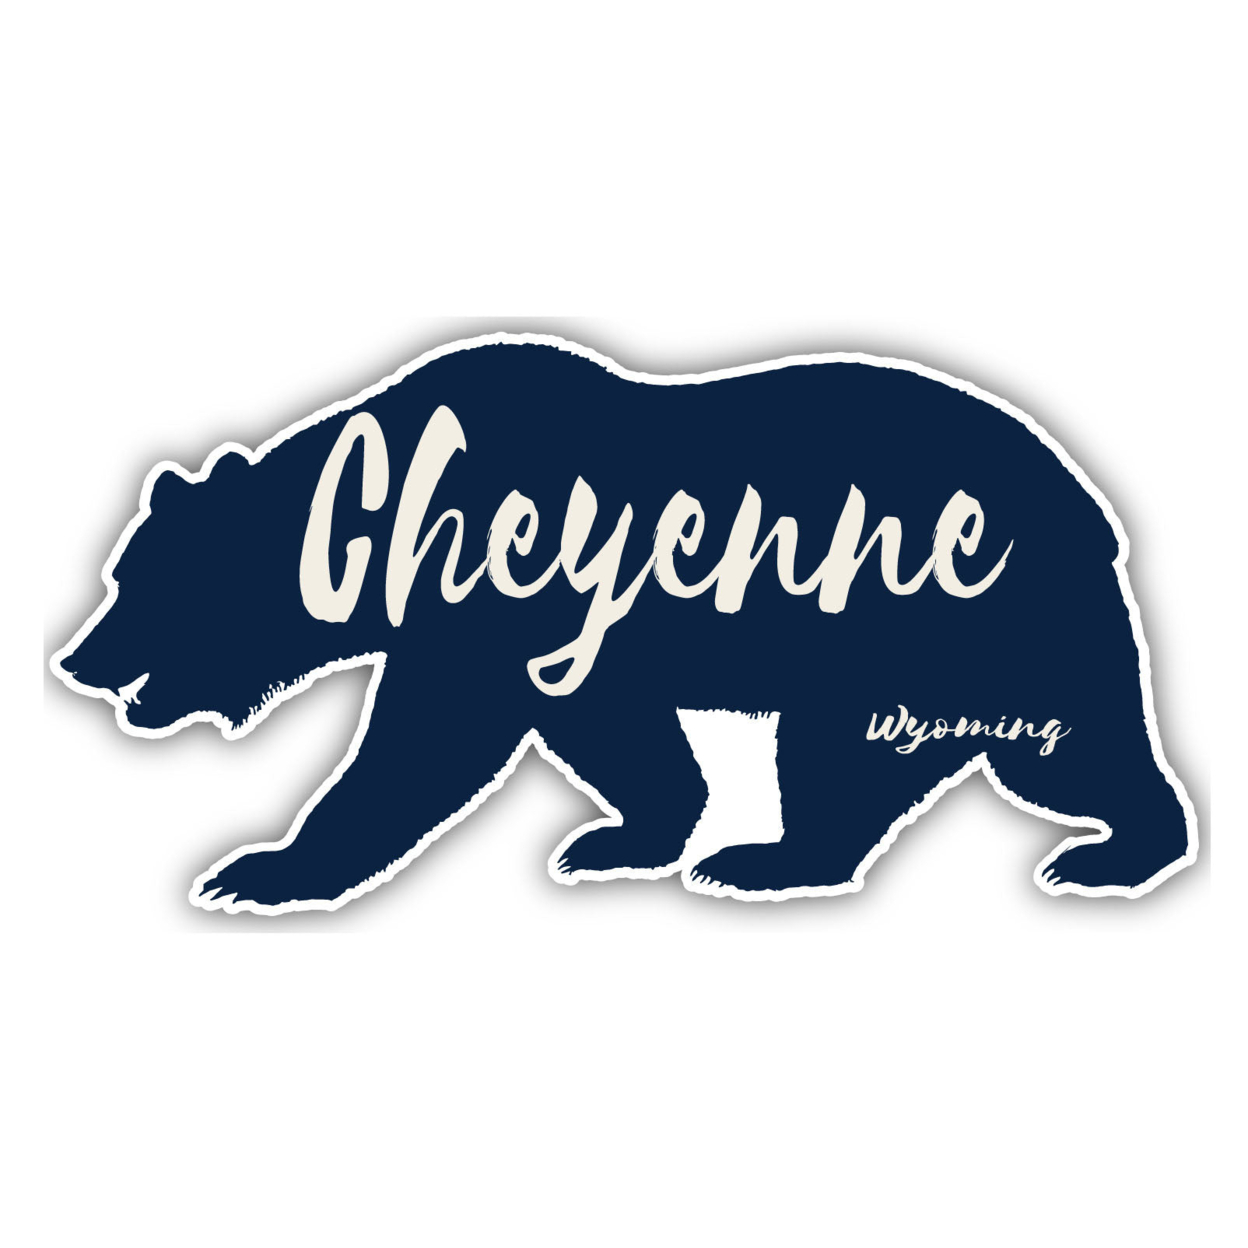 Cheyenne Wyoming Souvenir Decorative Stickers (Choose Theme And Size) - Single Unit, 10-Inch, Tent